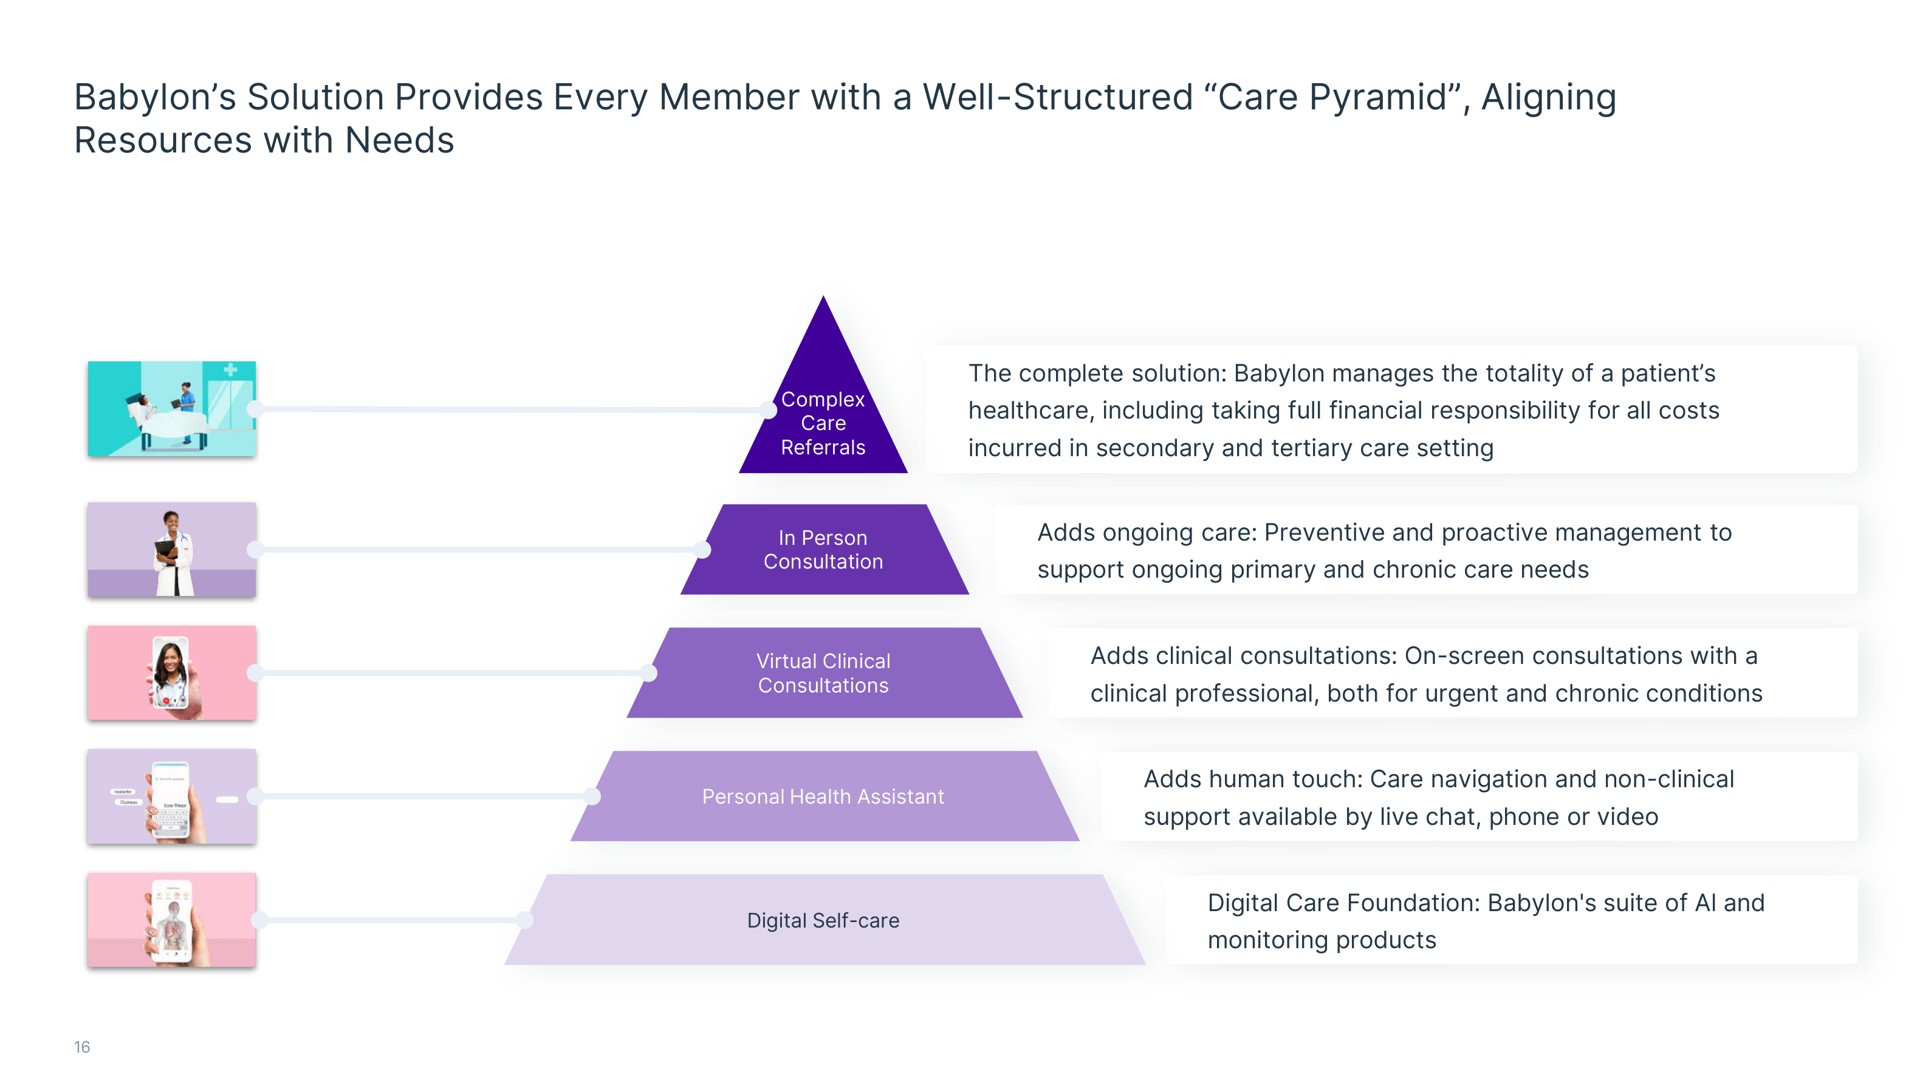 solution provides every member with a well structured care pyramid aligning resources with needs | Babylon